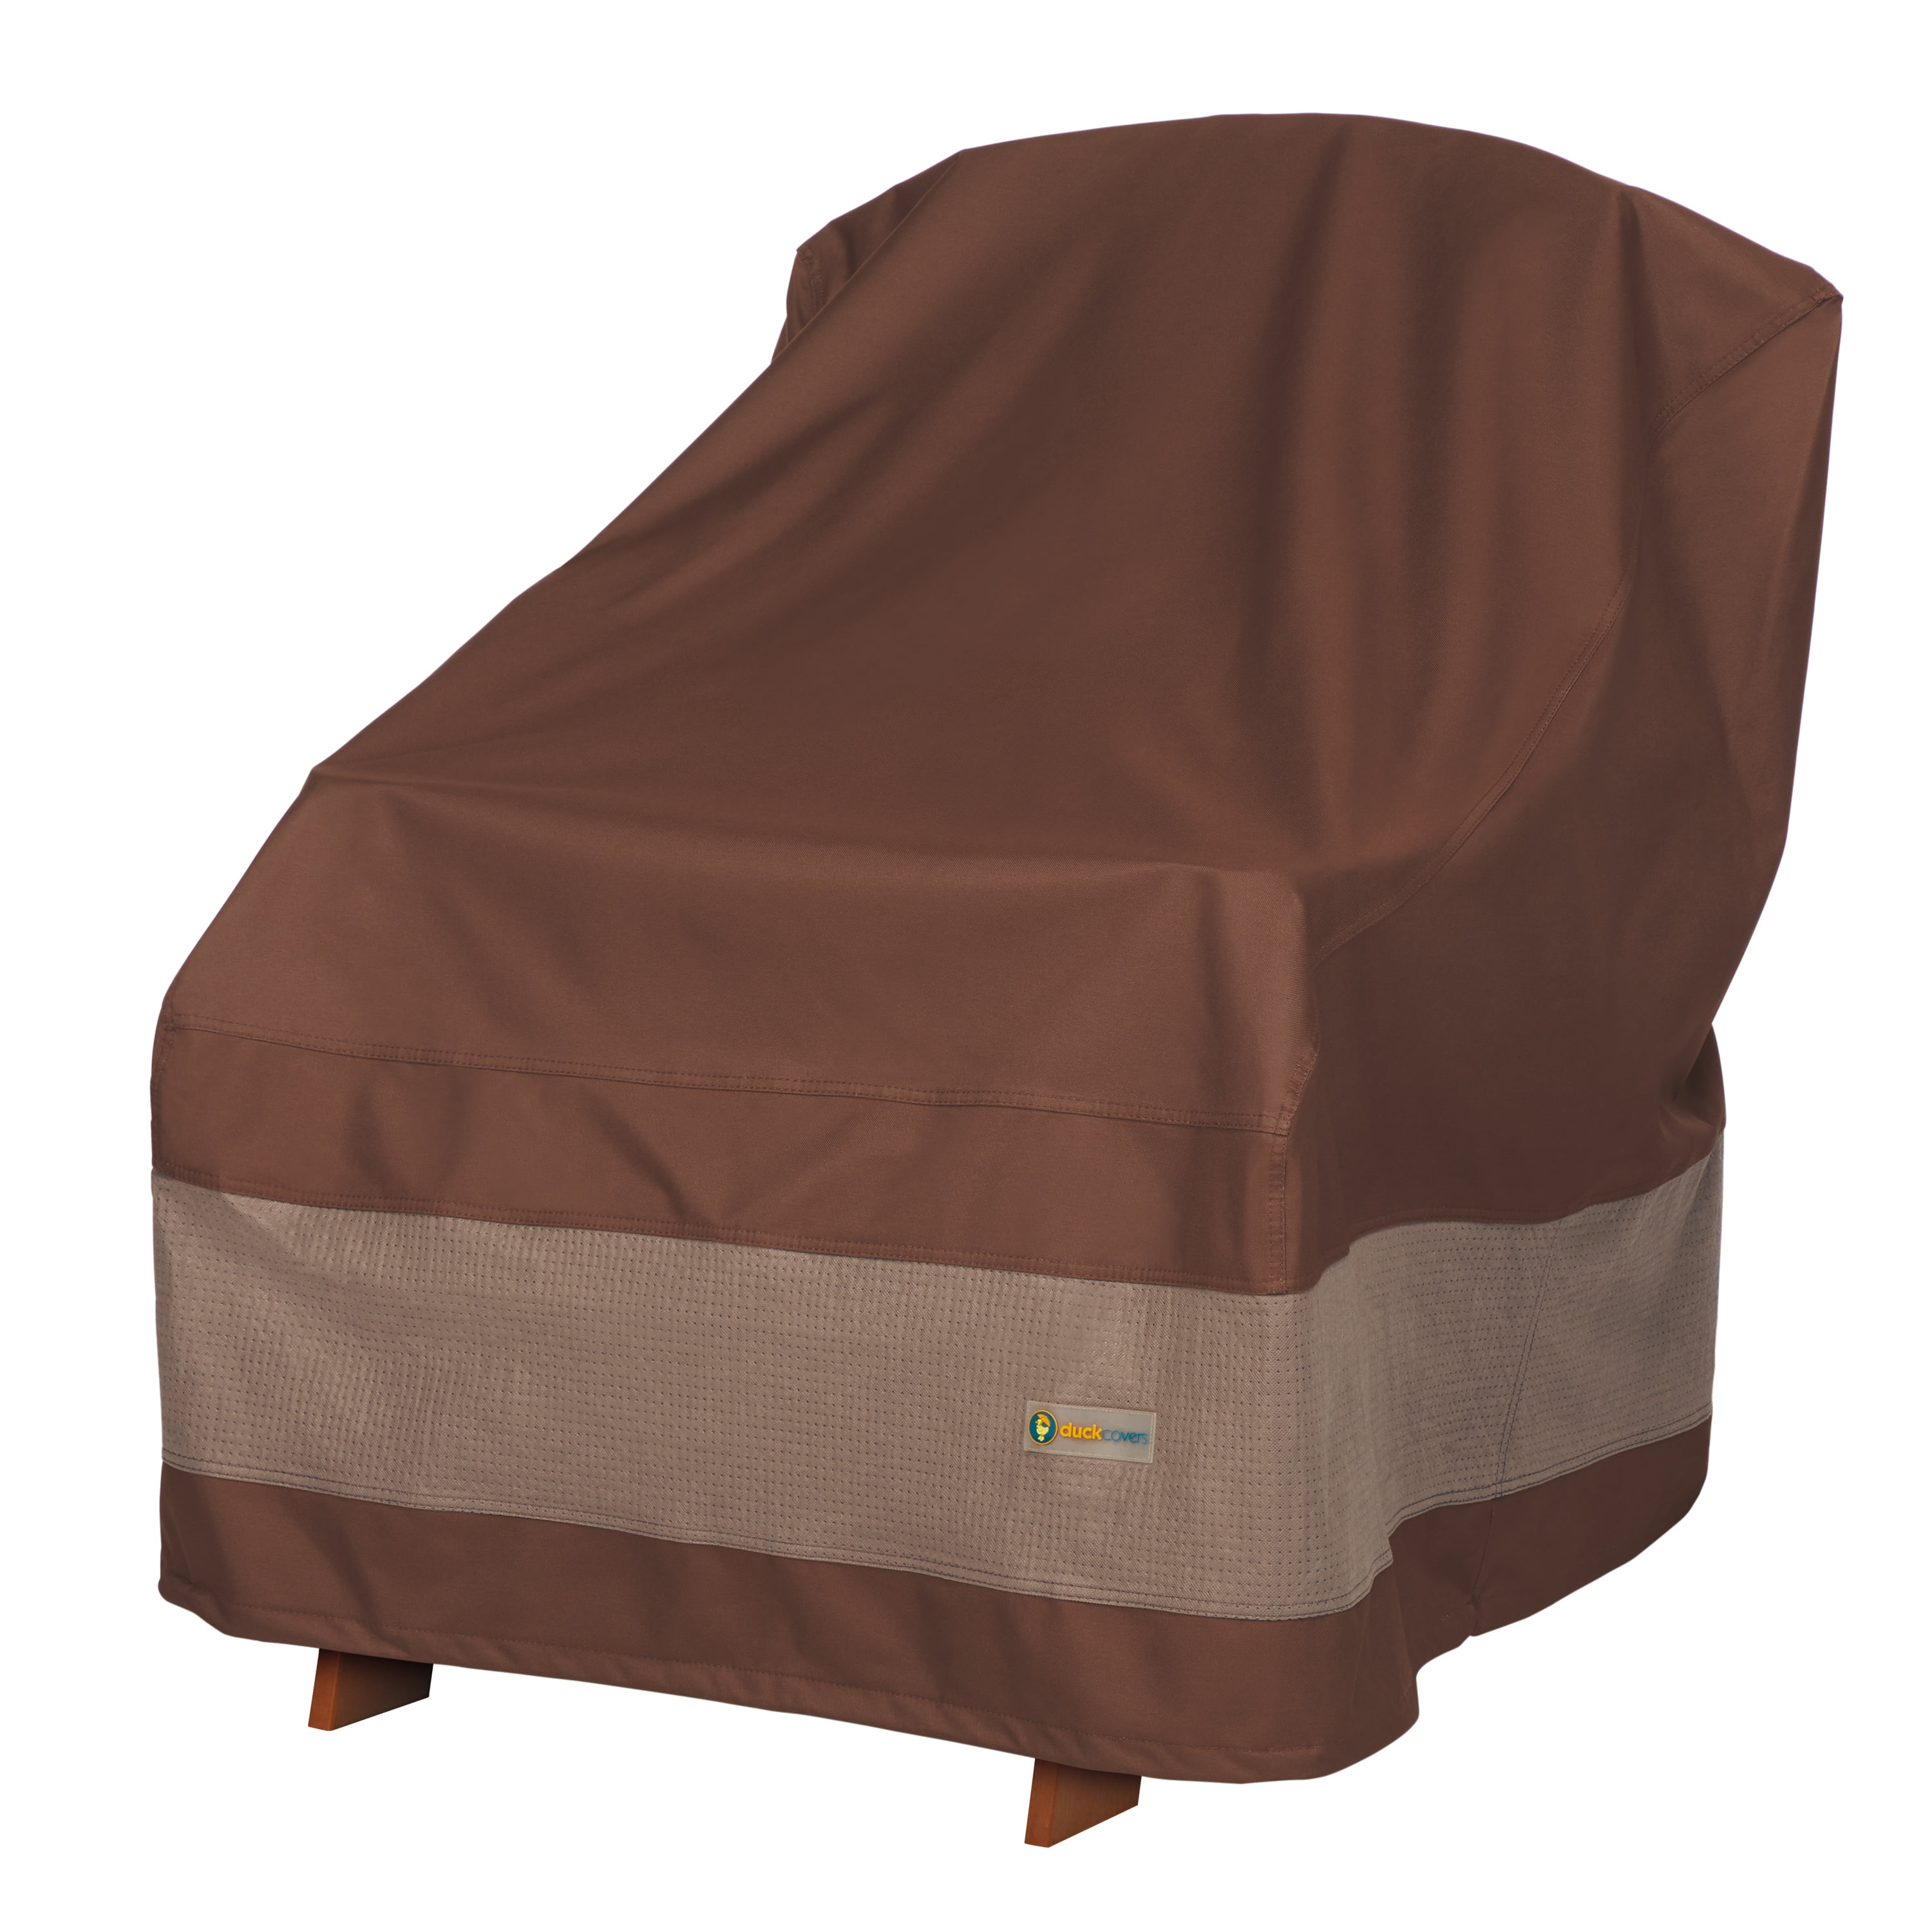 Minimalist Outdoor Chair Covers Walmart for Small Space